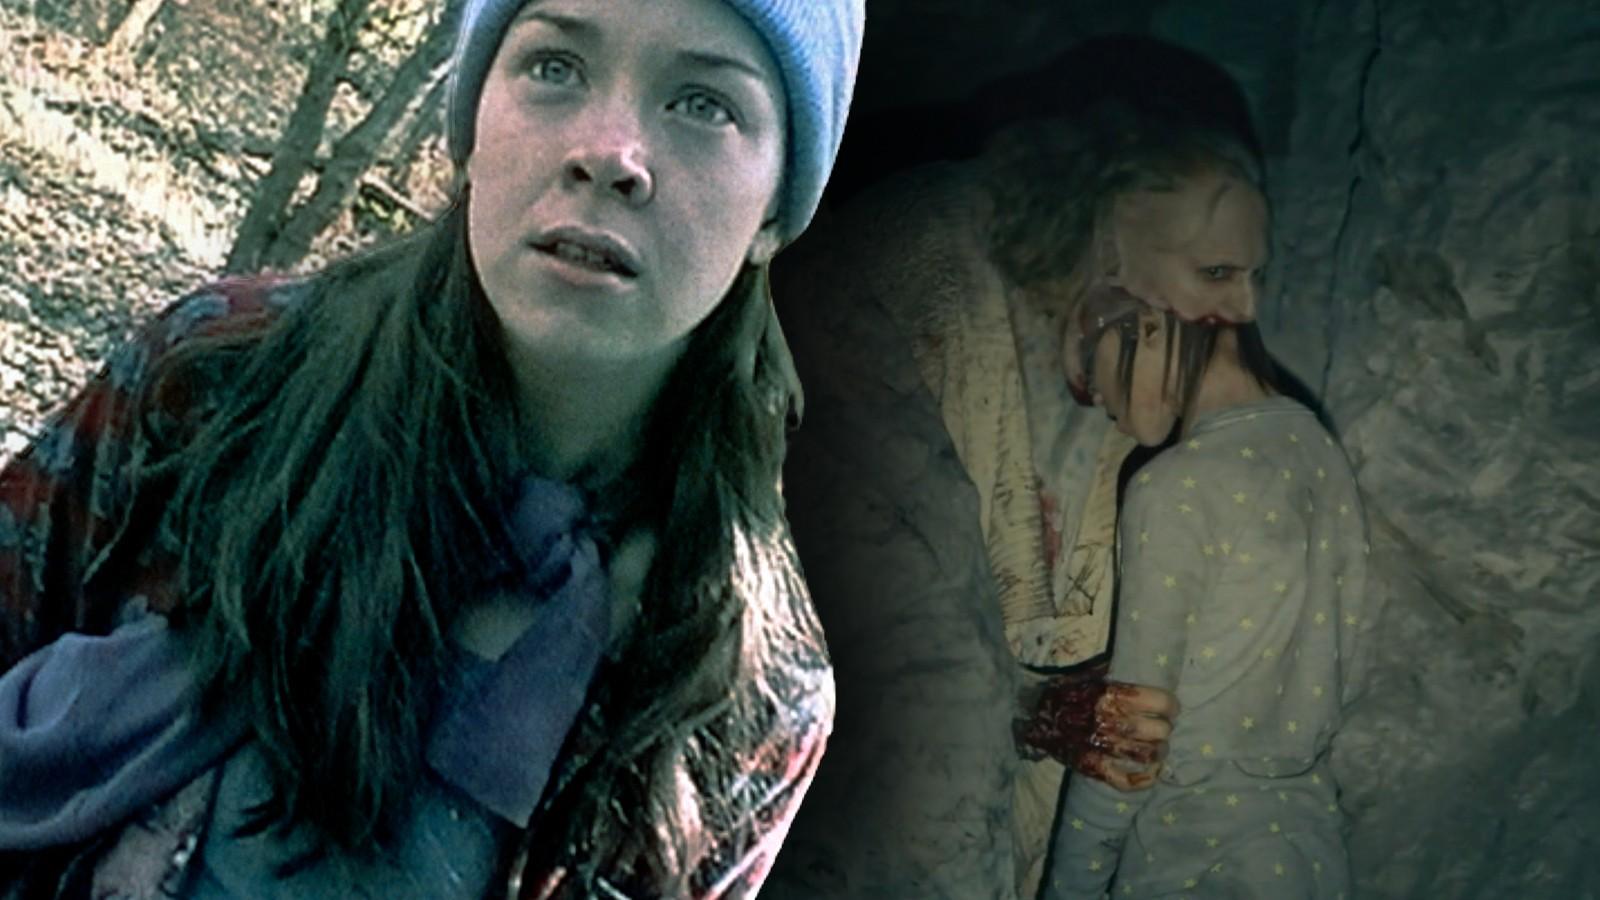 Stills from The Blair Witch Project and The Taking of Deborah Logan